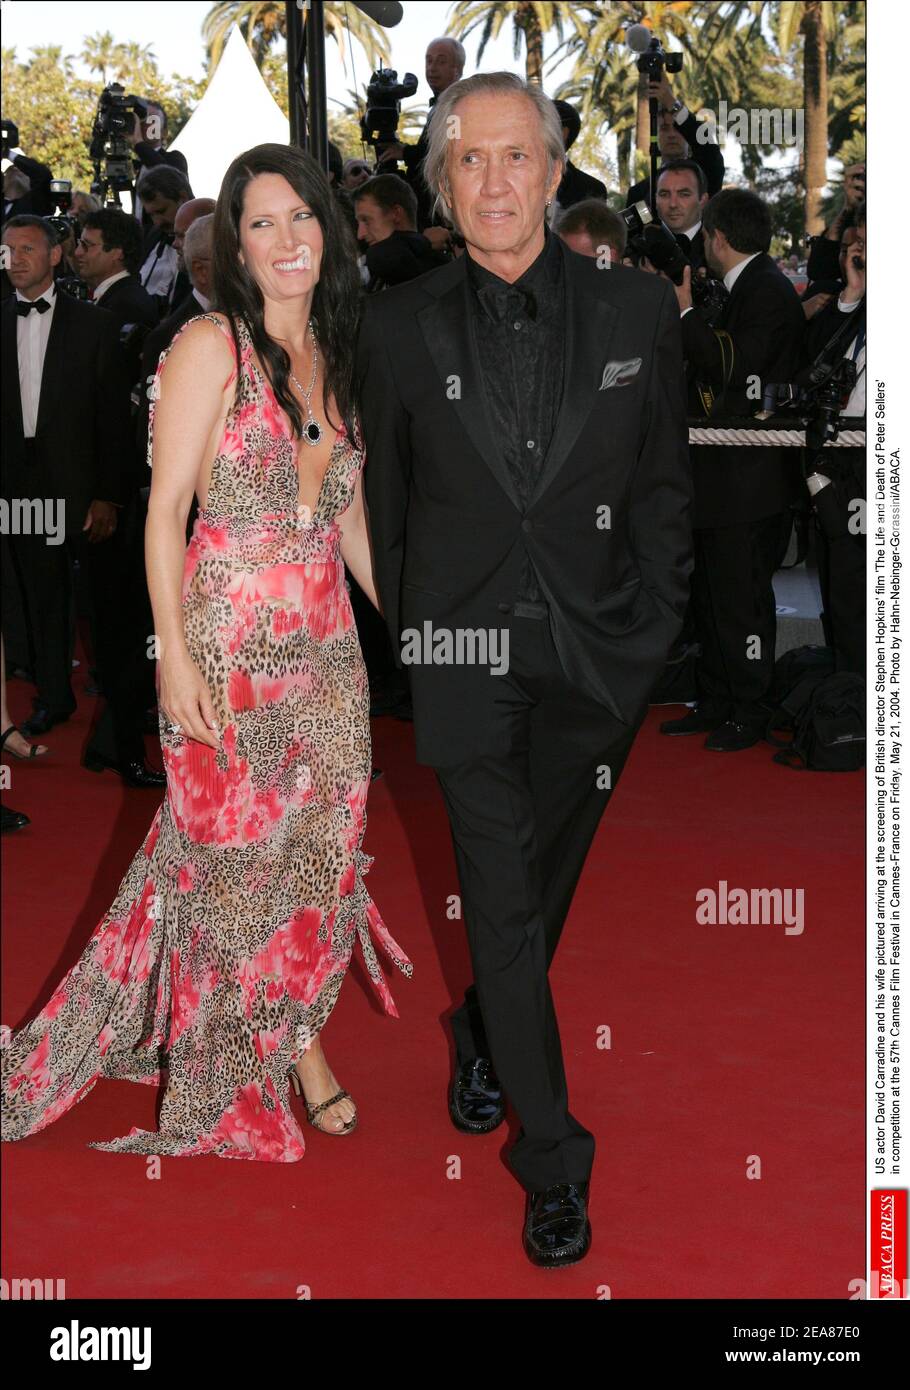 US actor David Carradine and his wife Annie Bierman pictured arriving at the screening of British director Stephen Hopkins' film 'The Life and Death of Peter Sellers' in competition at the 57th Cannes Film Festival in Cannes-France on Friday, May 21, 2004. Photo by Hahn-Nebinger-Gorassini/ABACA. Stock Photo